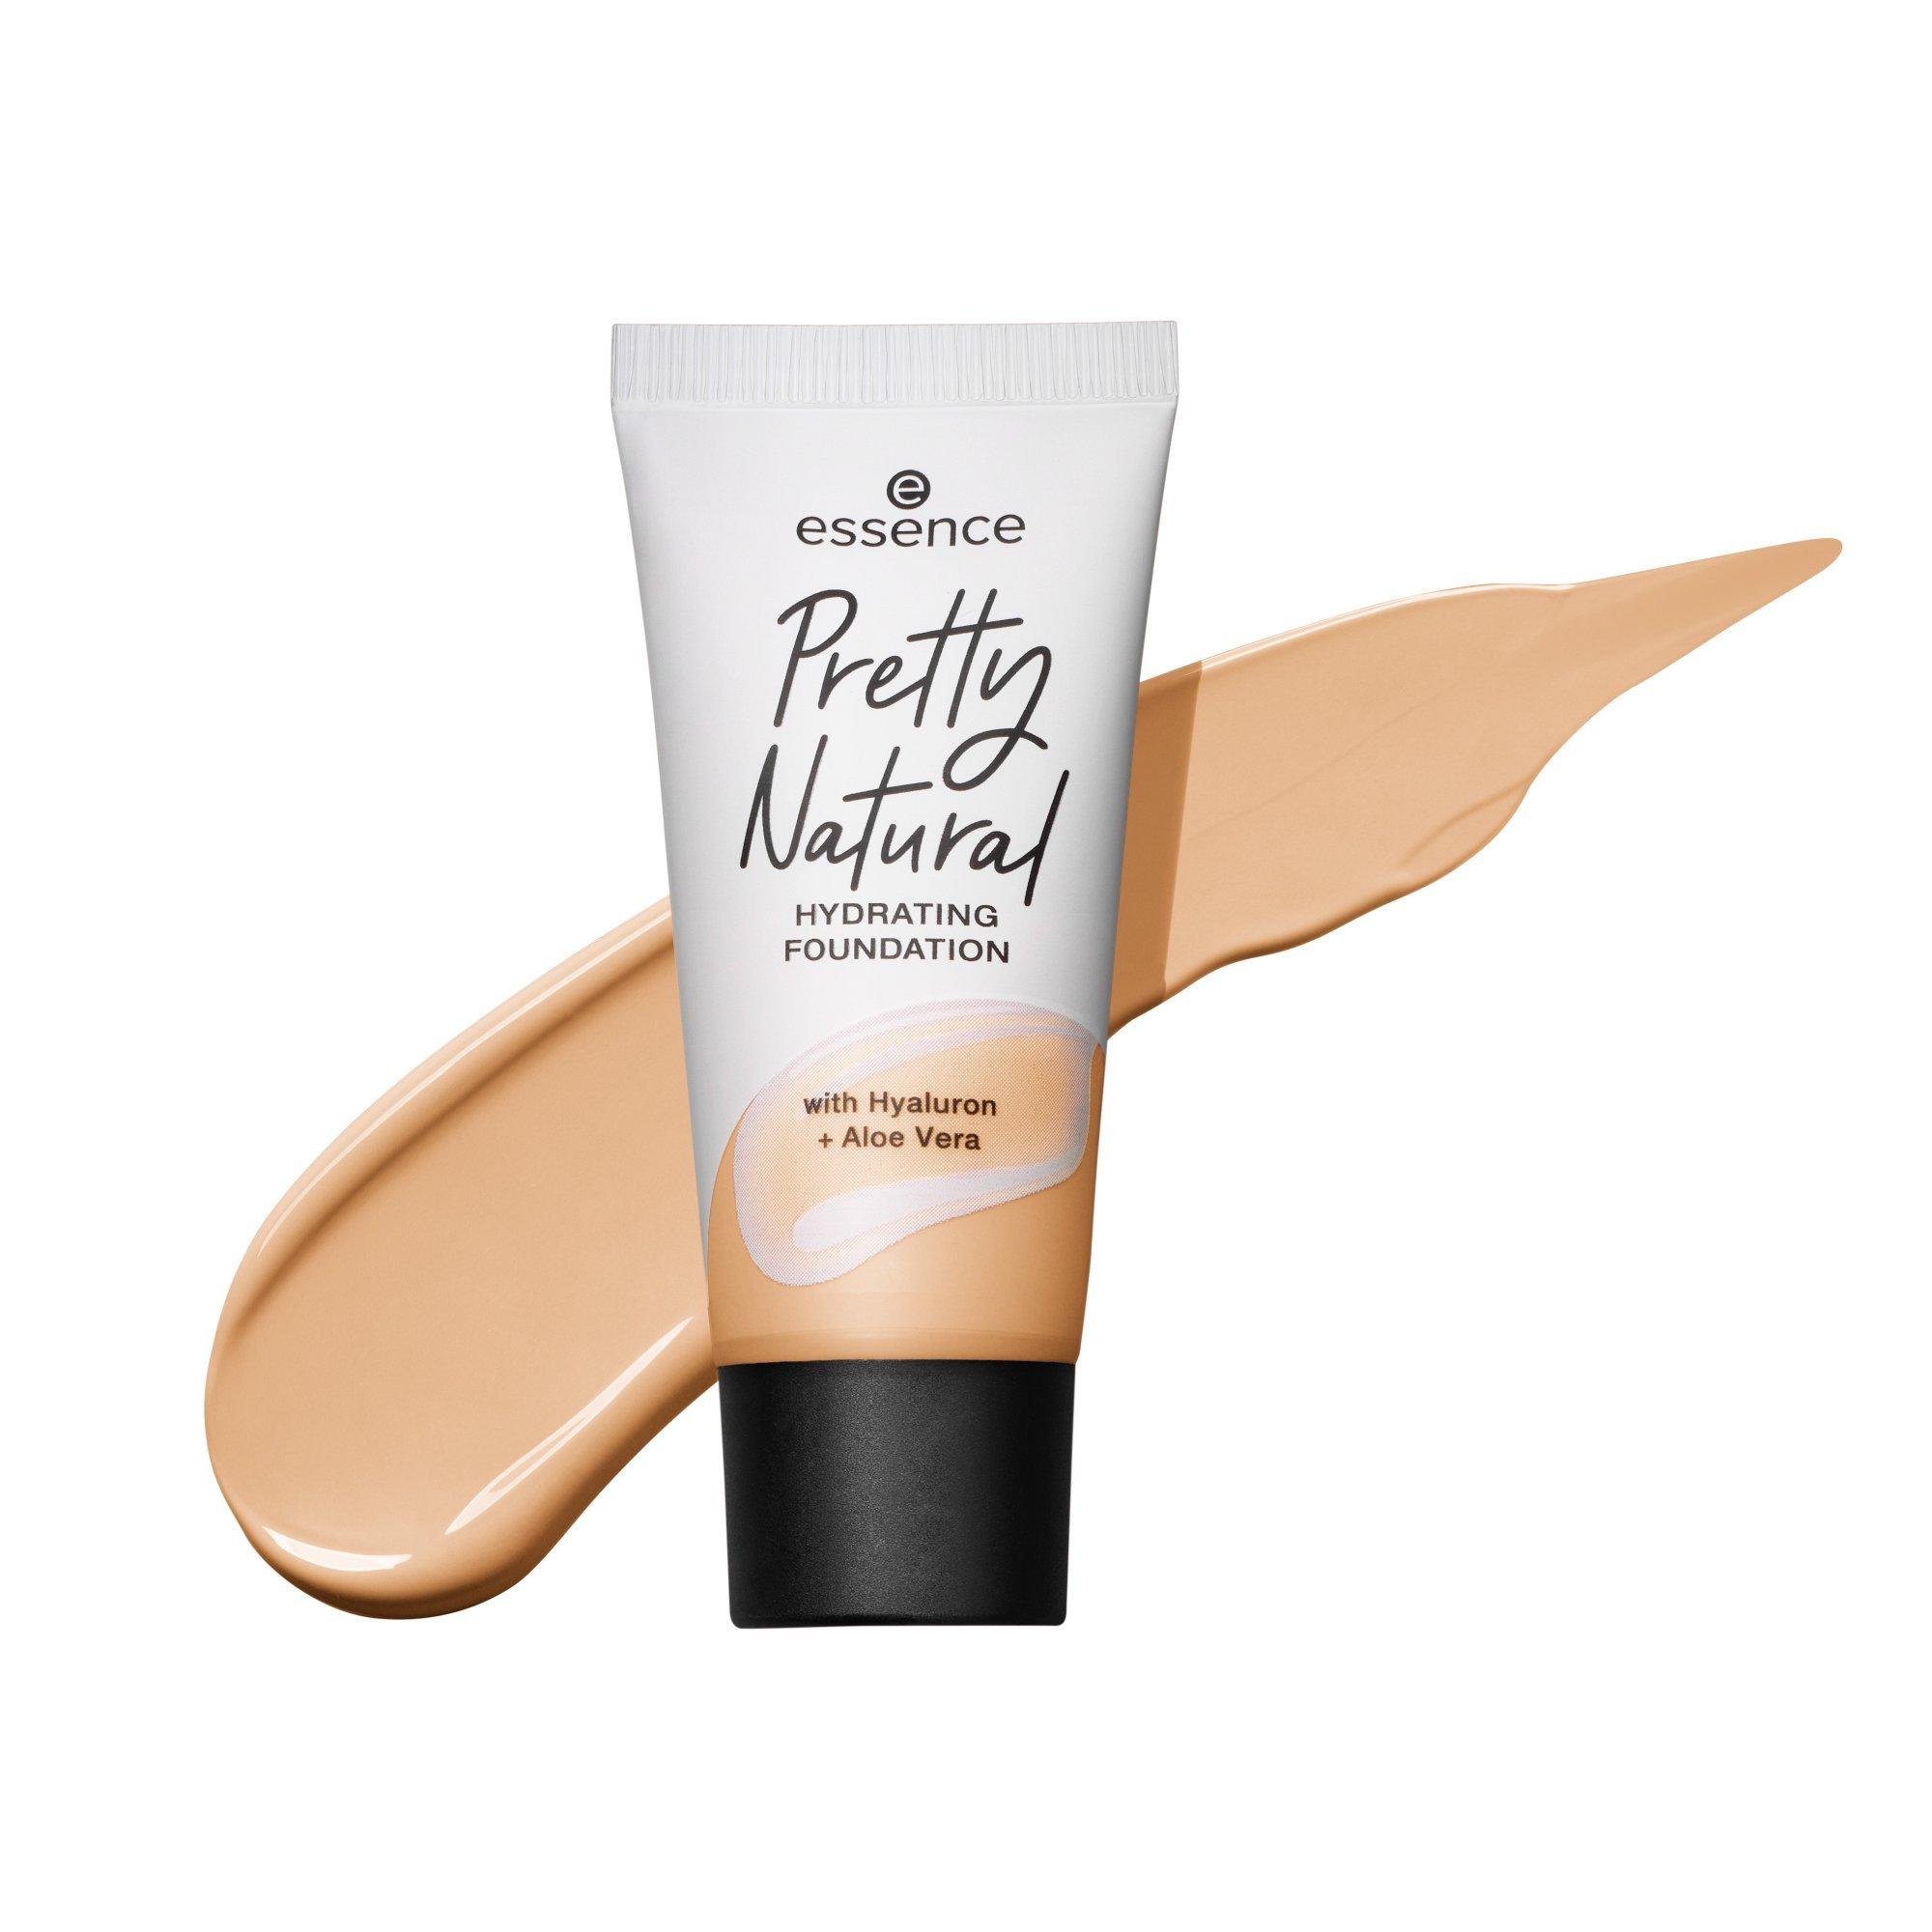 Pretty Natural HYDRATING FOUNDATION